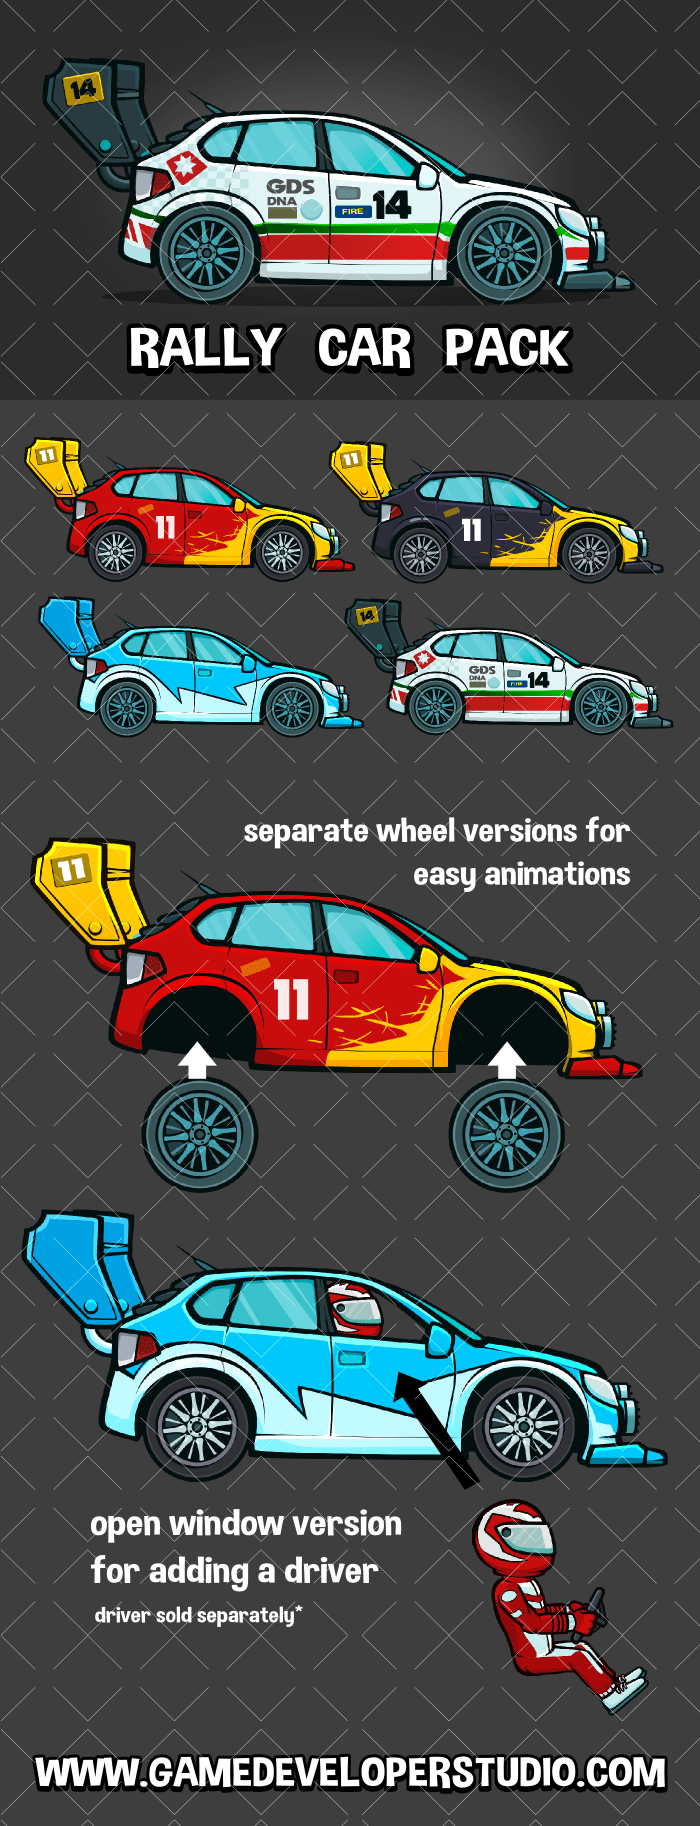 Rally car pack